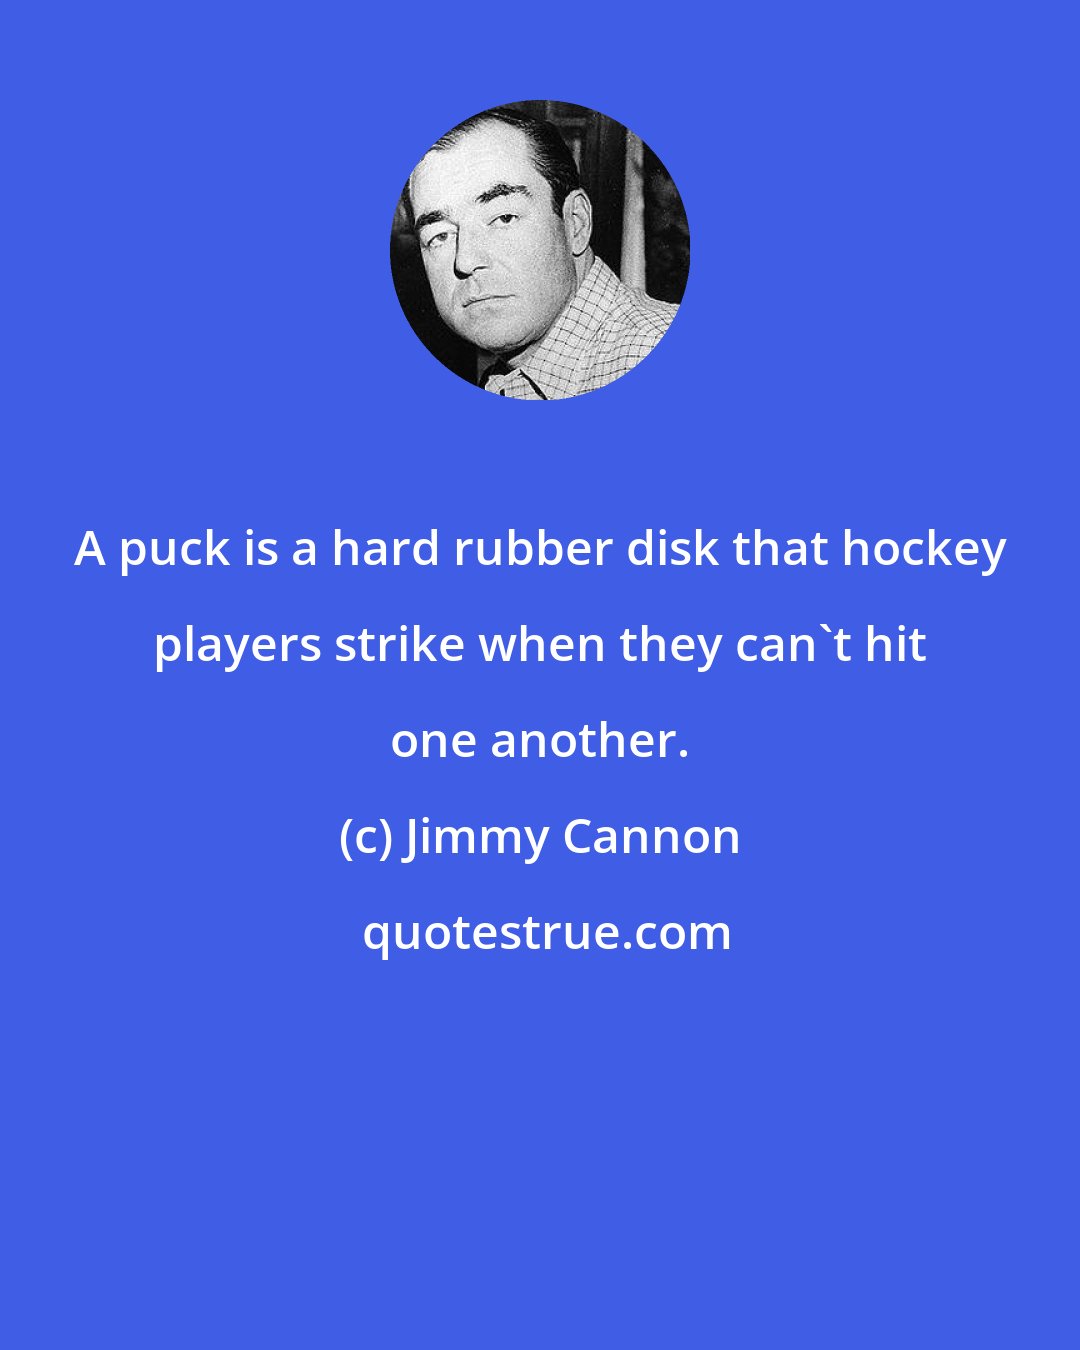 Jimmy Cannon: A puck is a hard rubber disk that hockey players strike when they can't hit one another.